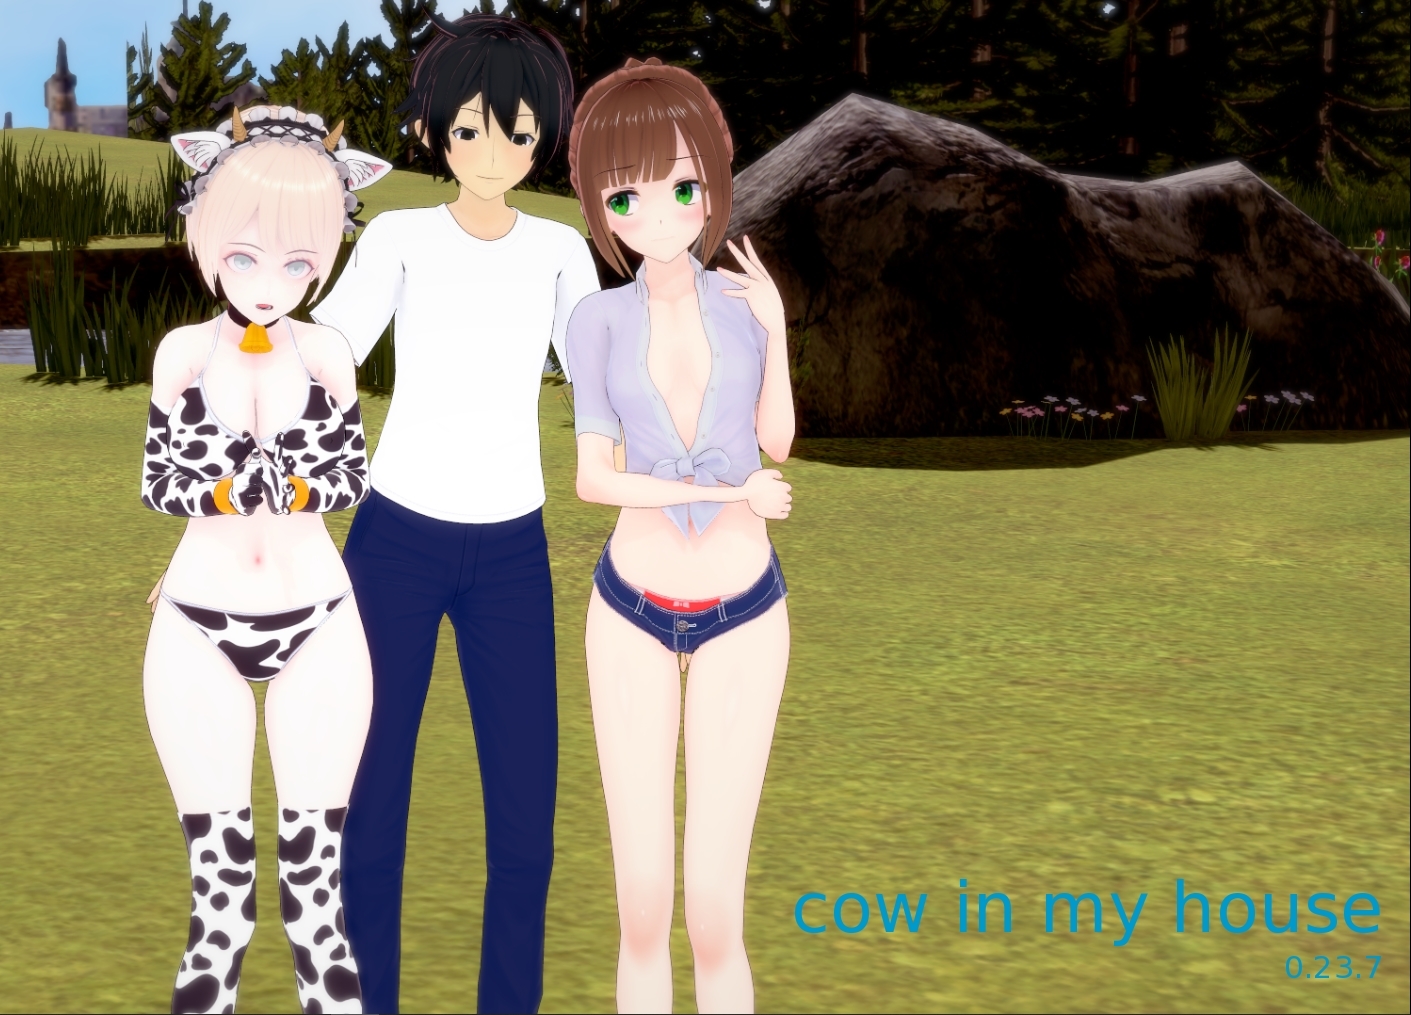 Cow In My House v0.23.7 - free game download, reviews, mega - xGames